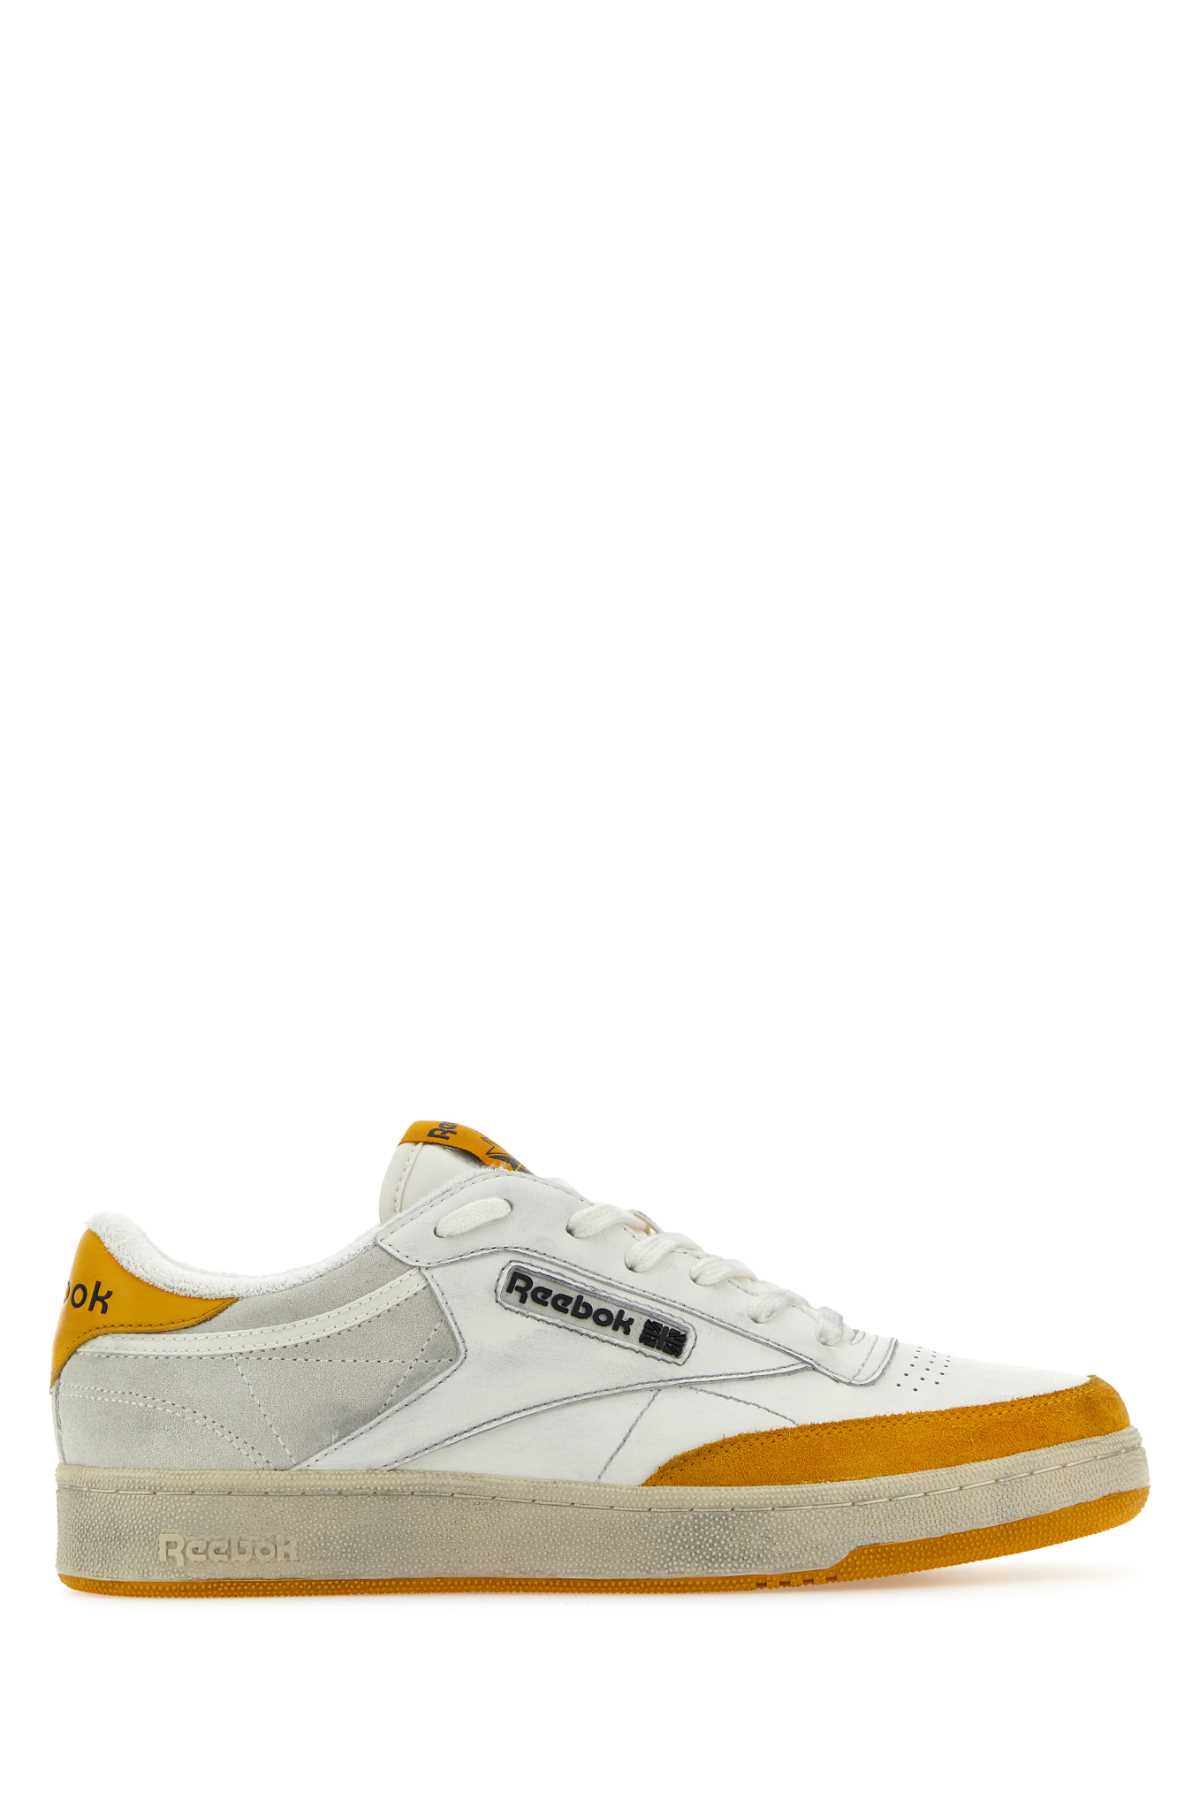 Two-tone Leather And Suede Club C Sneakers